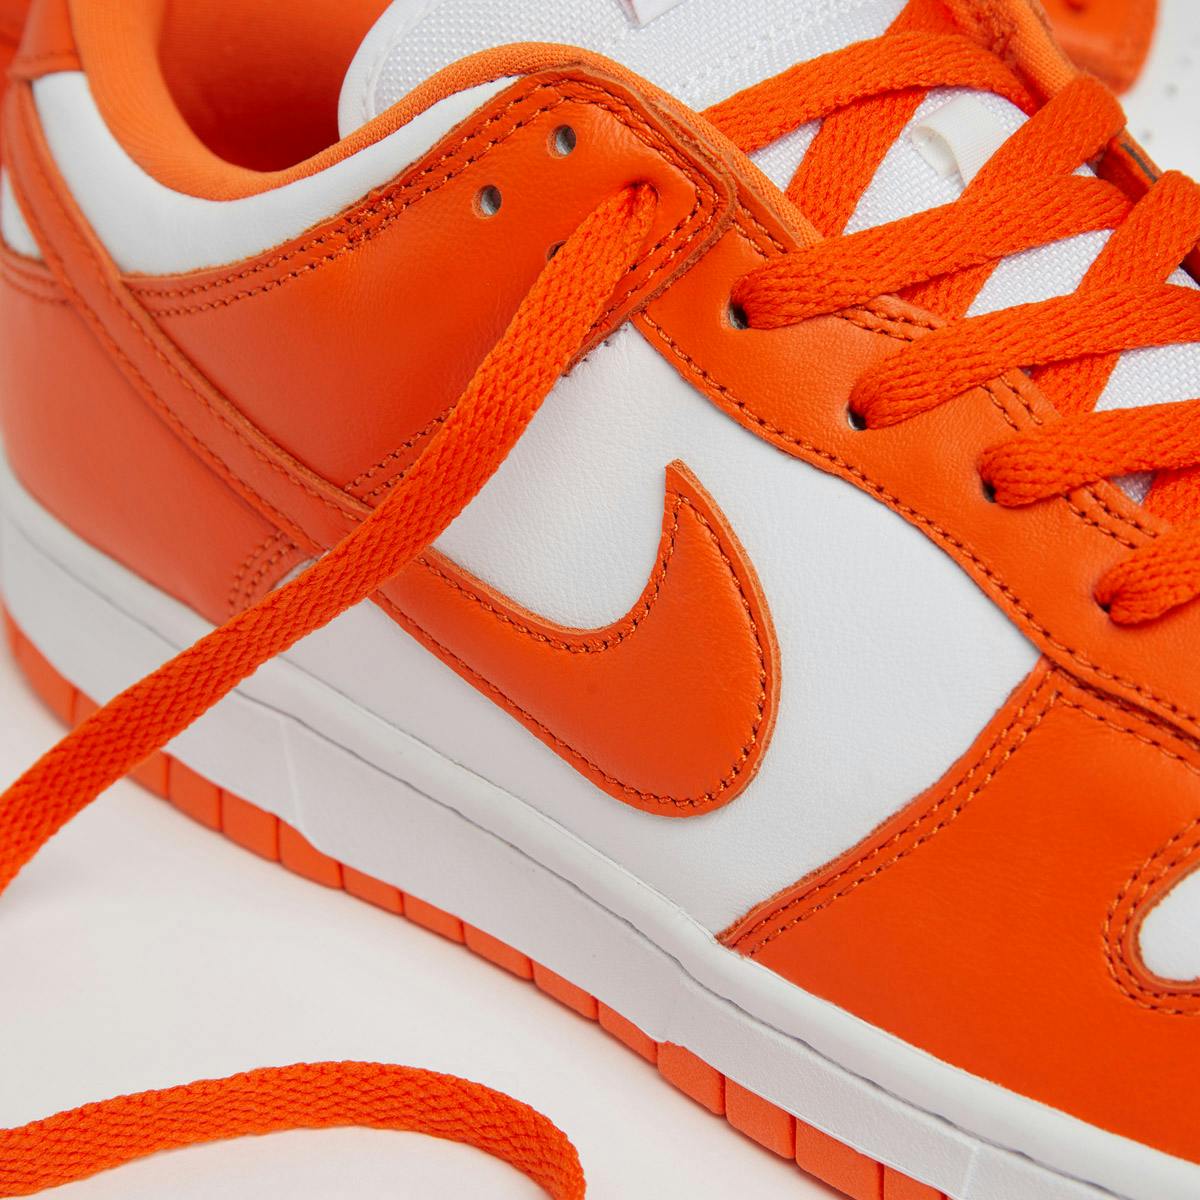 Nike SB Dunk Low Pro - Register Now on END. Launches